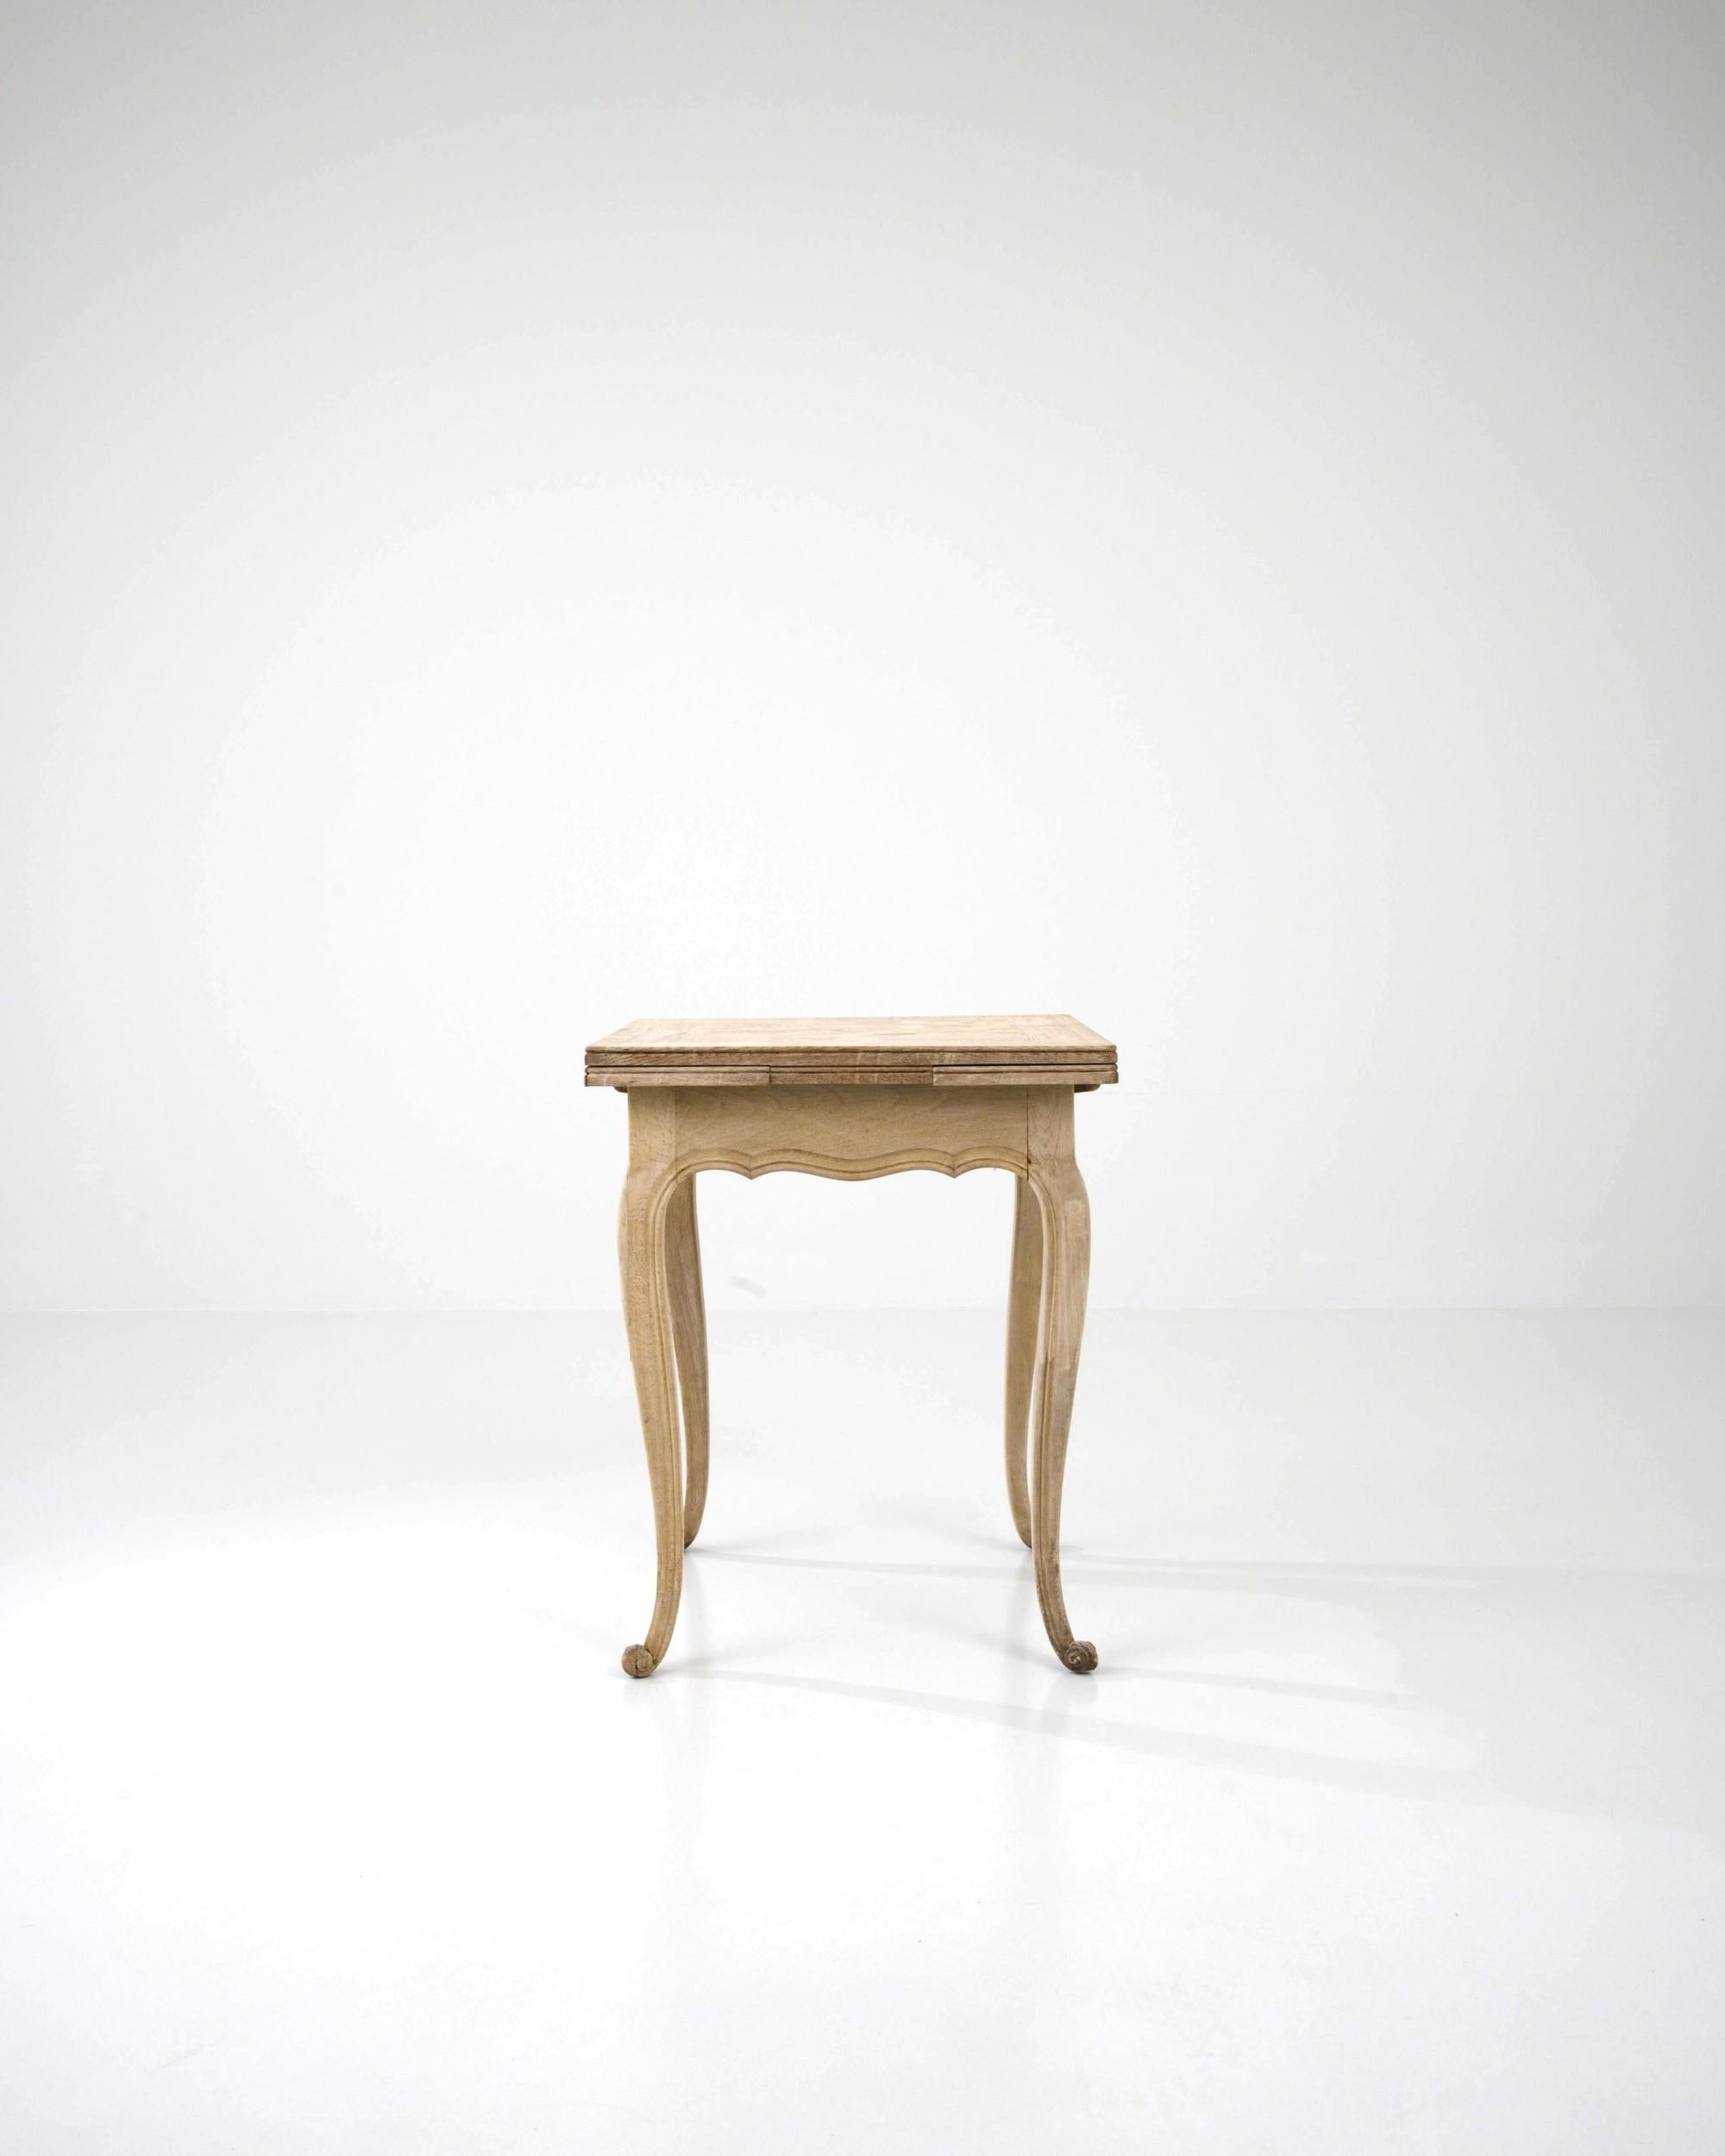 The gentle curvature of the cabriole legs, terminating in delicately carved scroll feet, imparts a graceful silhouette to this vintage table. Hand-crafted in Belgium in the early 20th century, this side table features a square tabletop with